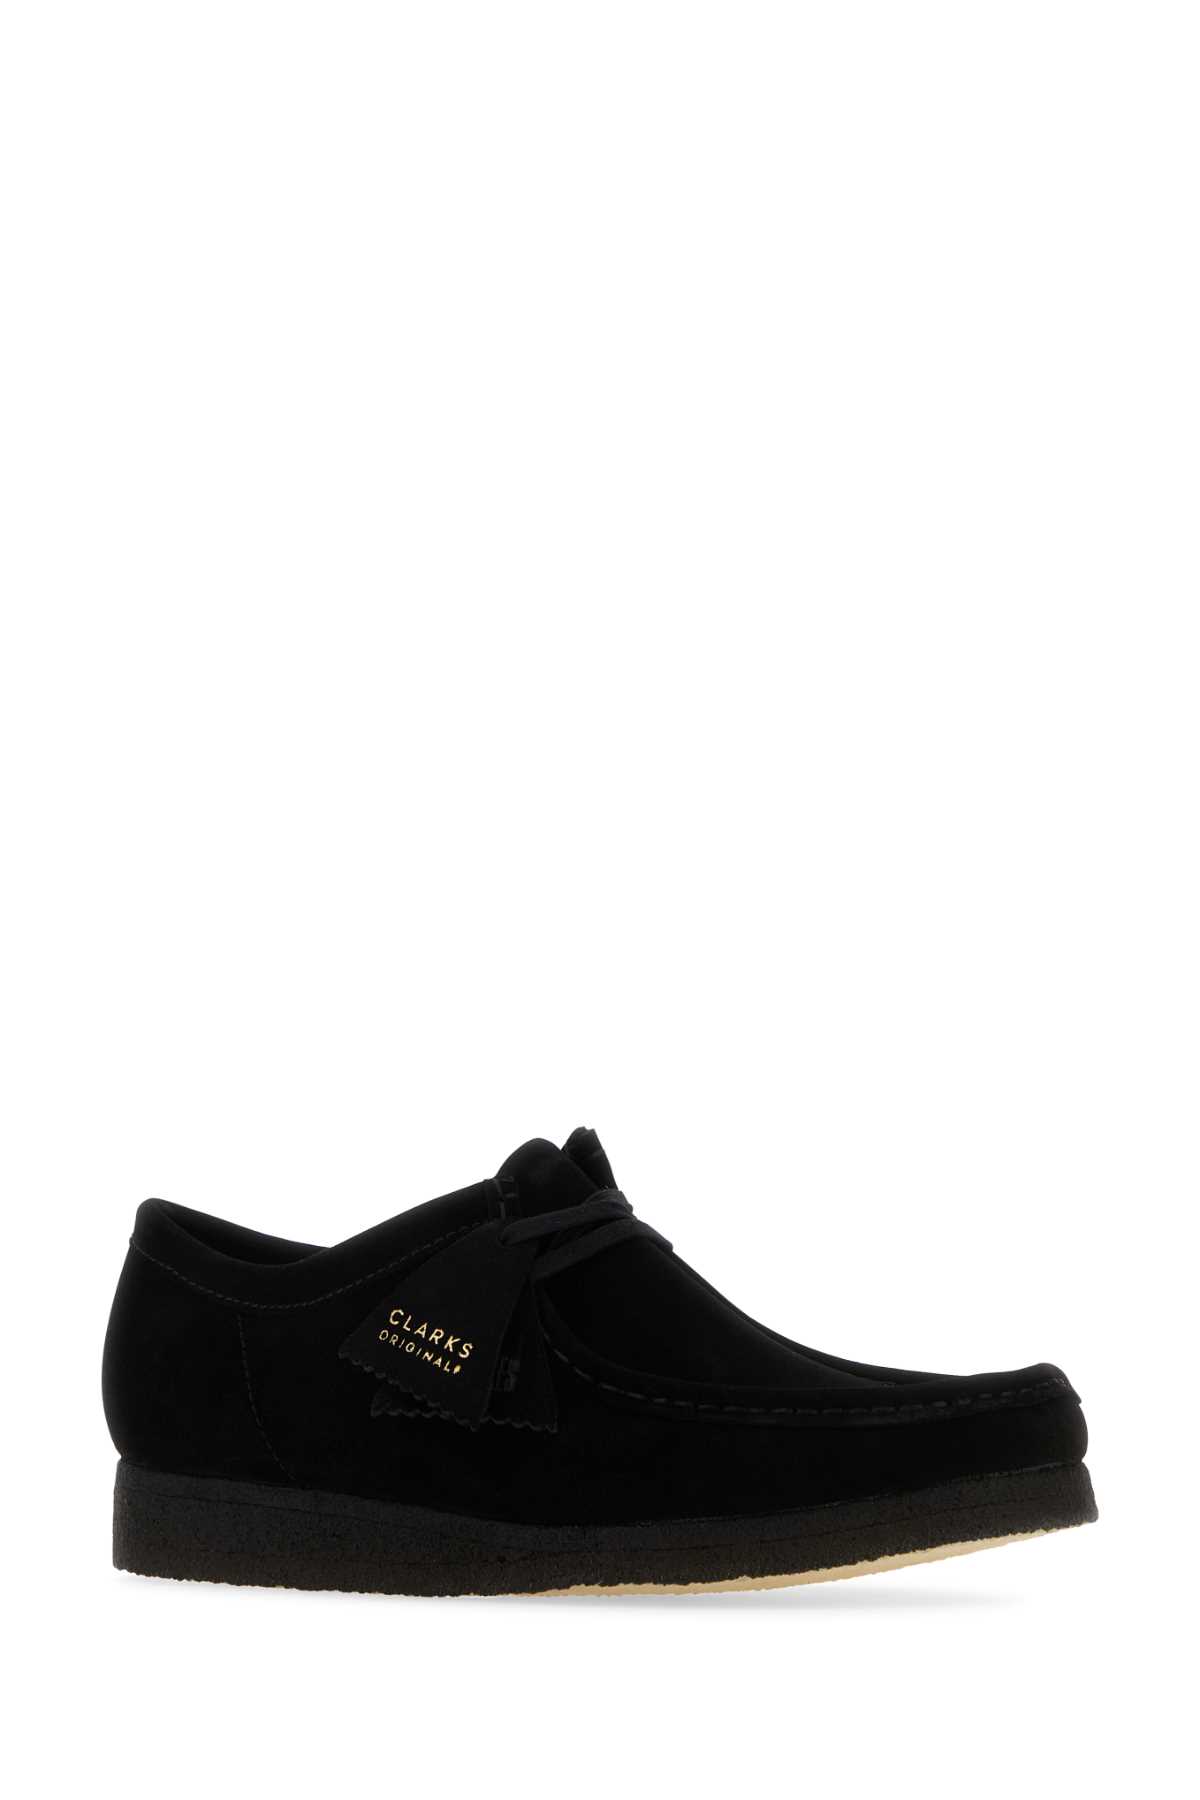 Clarks Black Suede Wallabee Ankle Boots In Blacksde